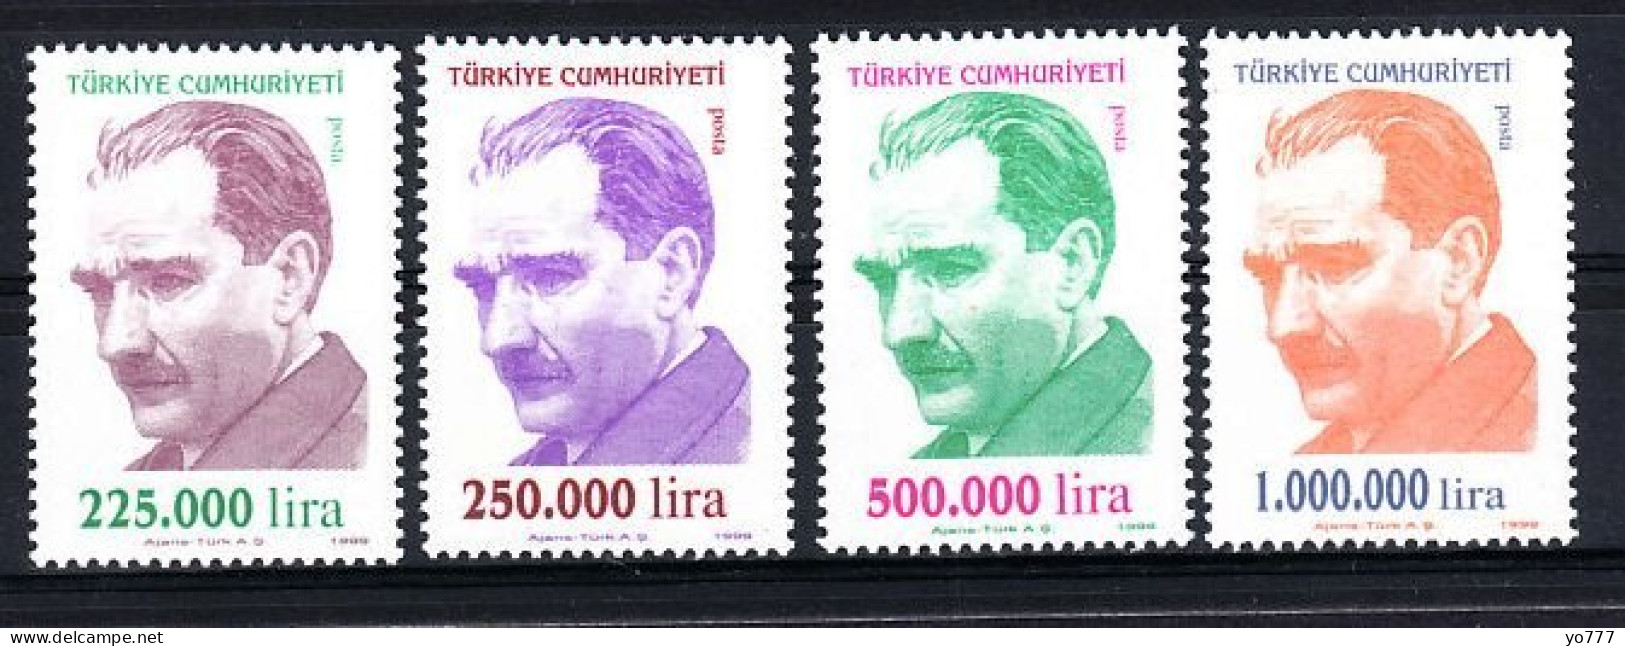 (3197-00) TURKEY REGULAR ISSUE STAMPS WITH THE PORTRAIT OF ATATURK MNH** - Nuevos